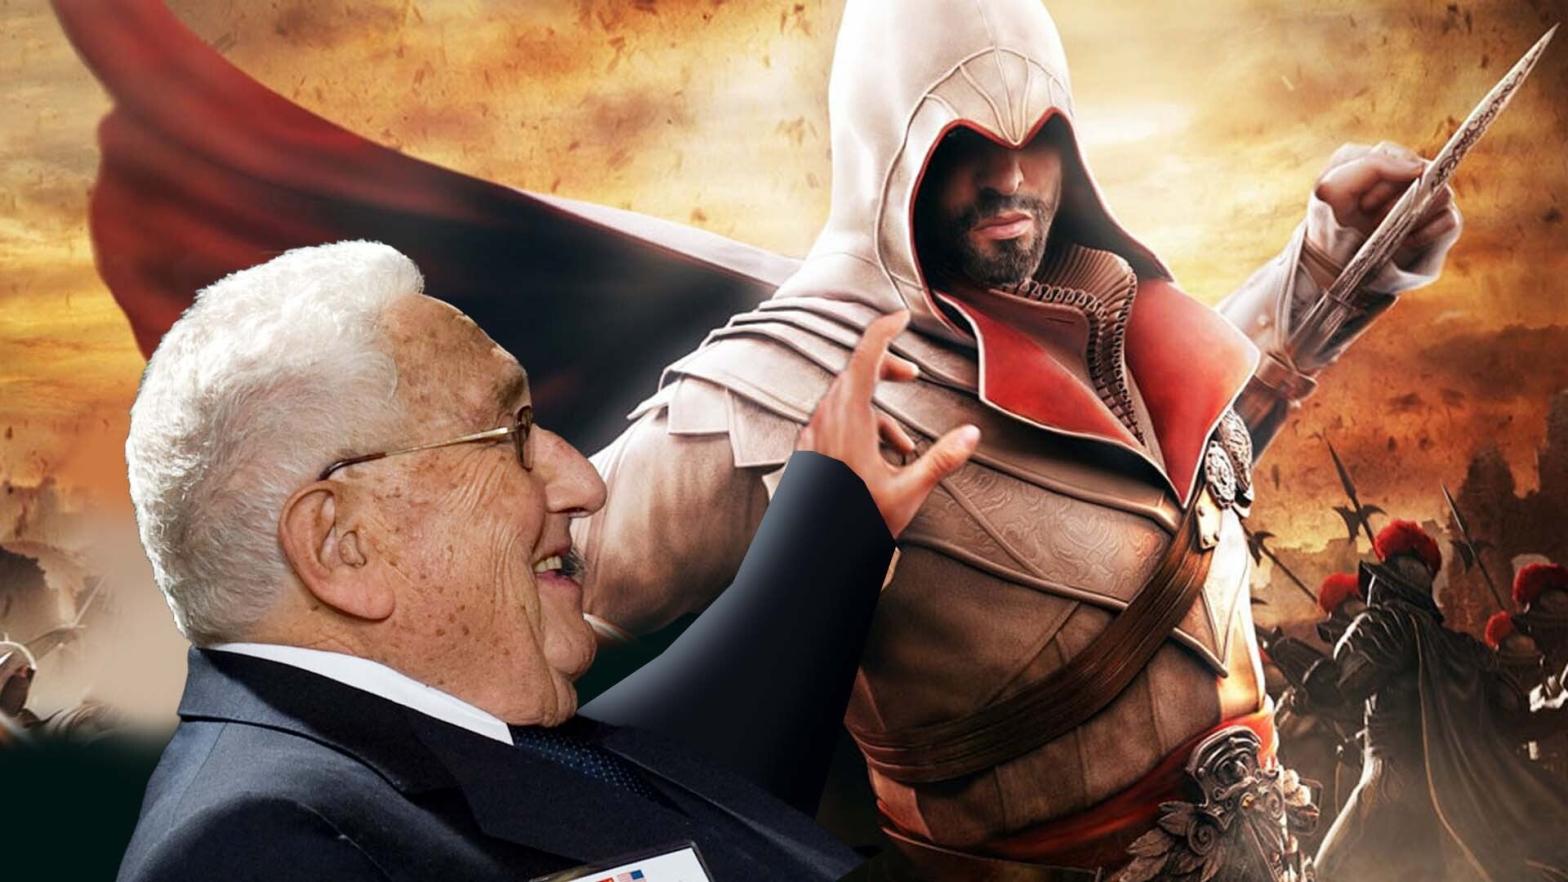 Did You Know Henry Kissinger Is A Canonical Villain In Assassin’s Creed?